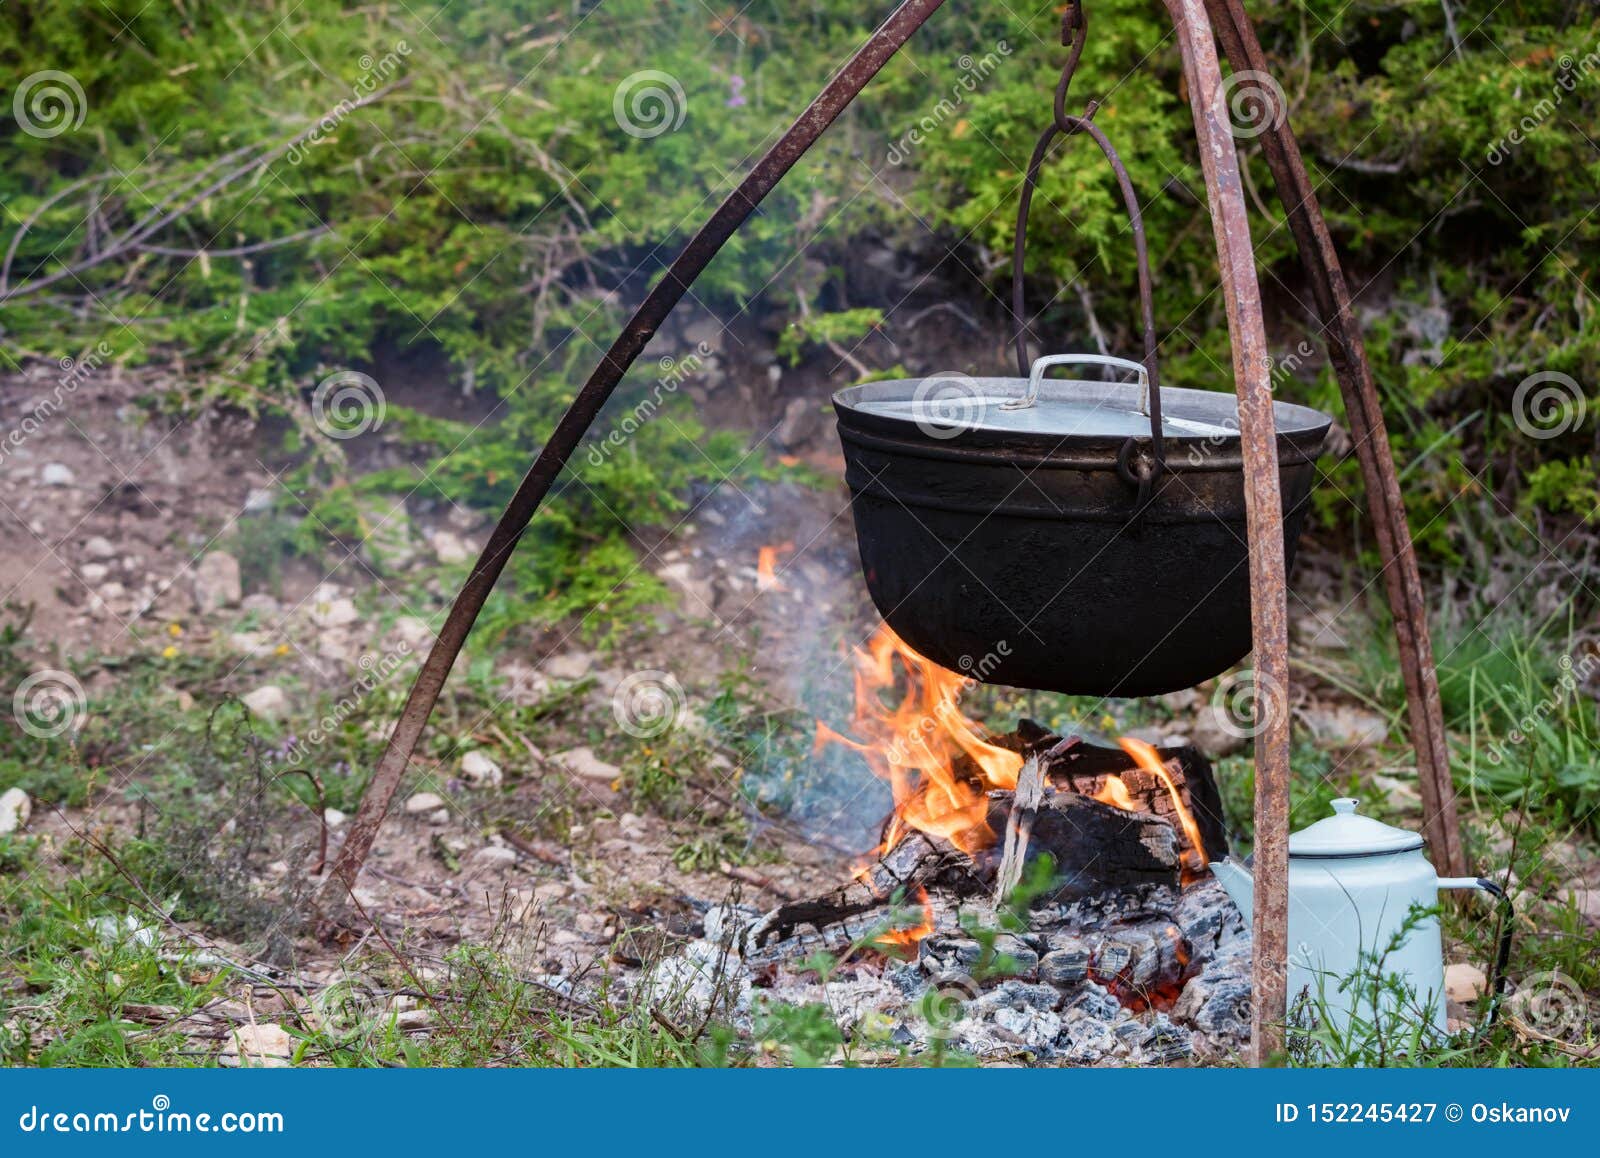 https://thumbs.dreamstime.com/z/cauldron-camping-kettle-over-open-fire-outdoors-view-caldron-adventure-cooking-meal-flame-152245427.jpg